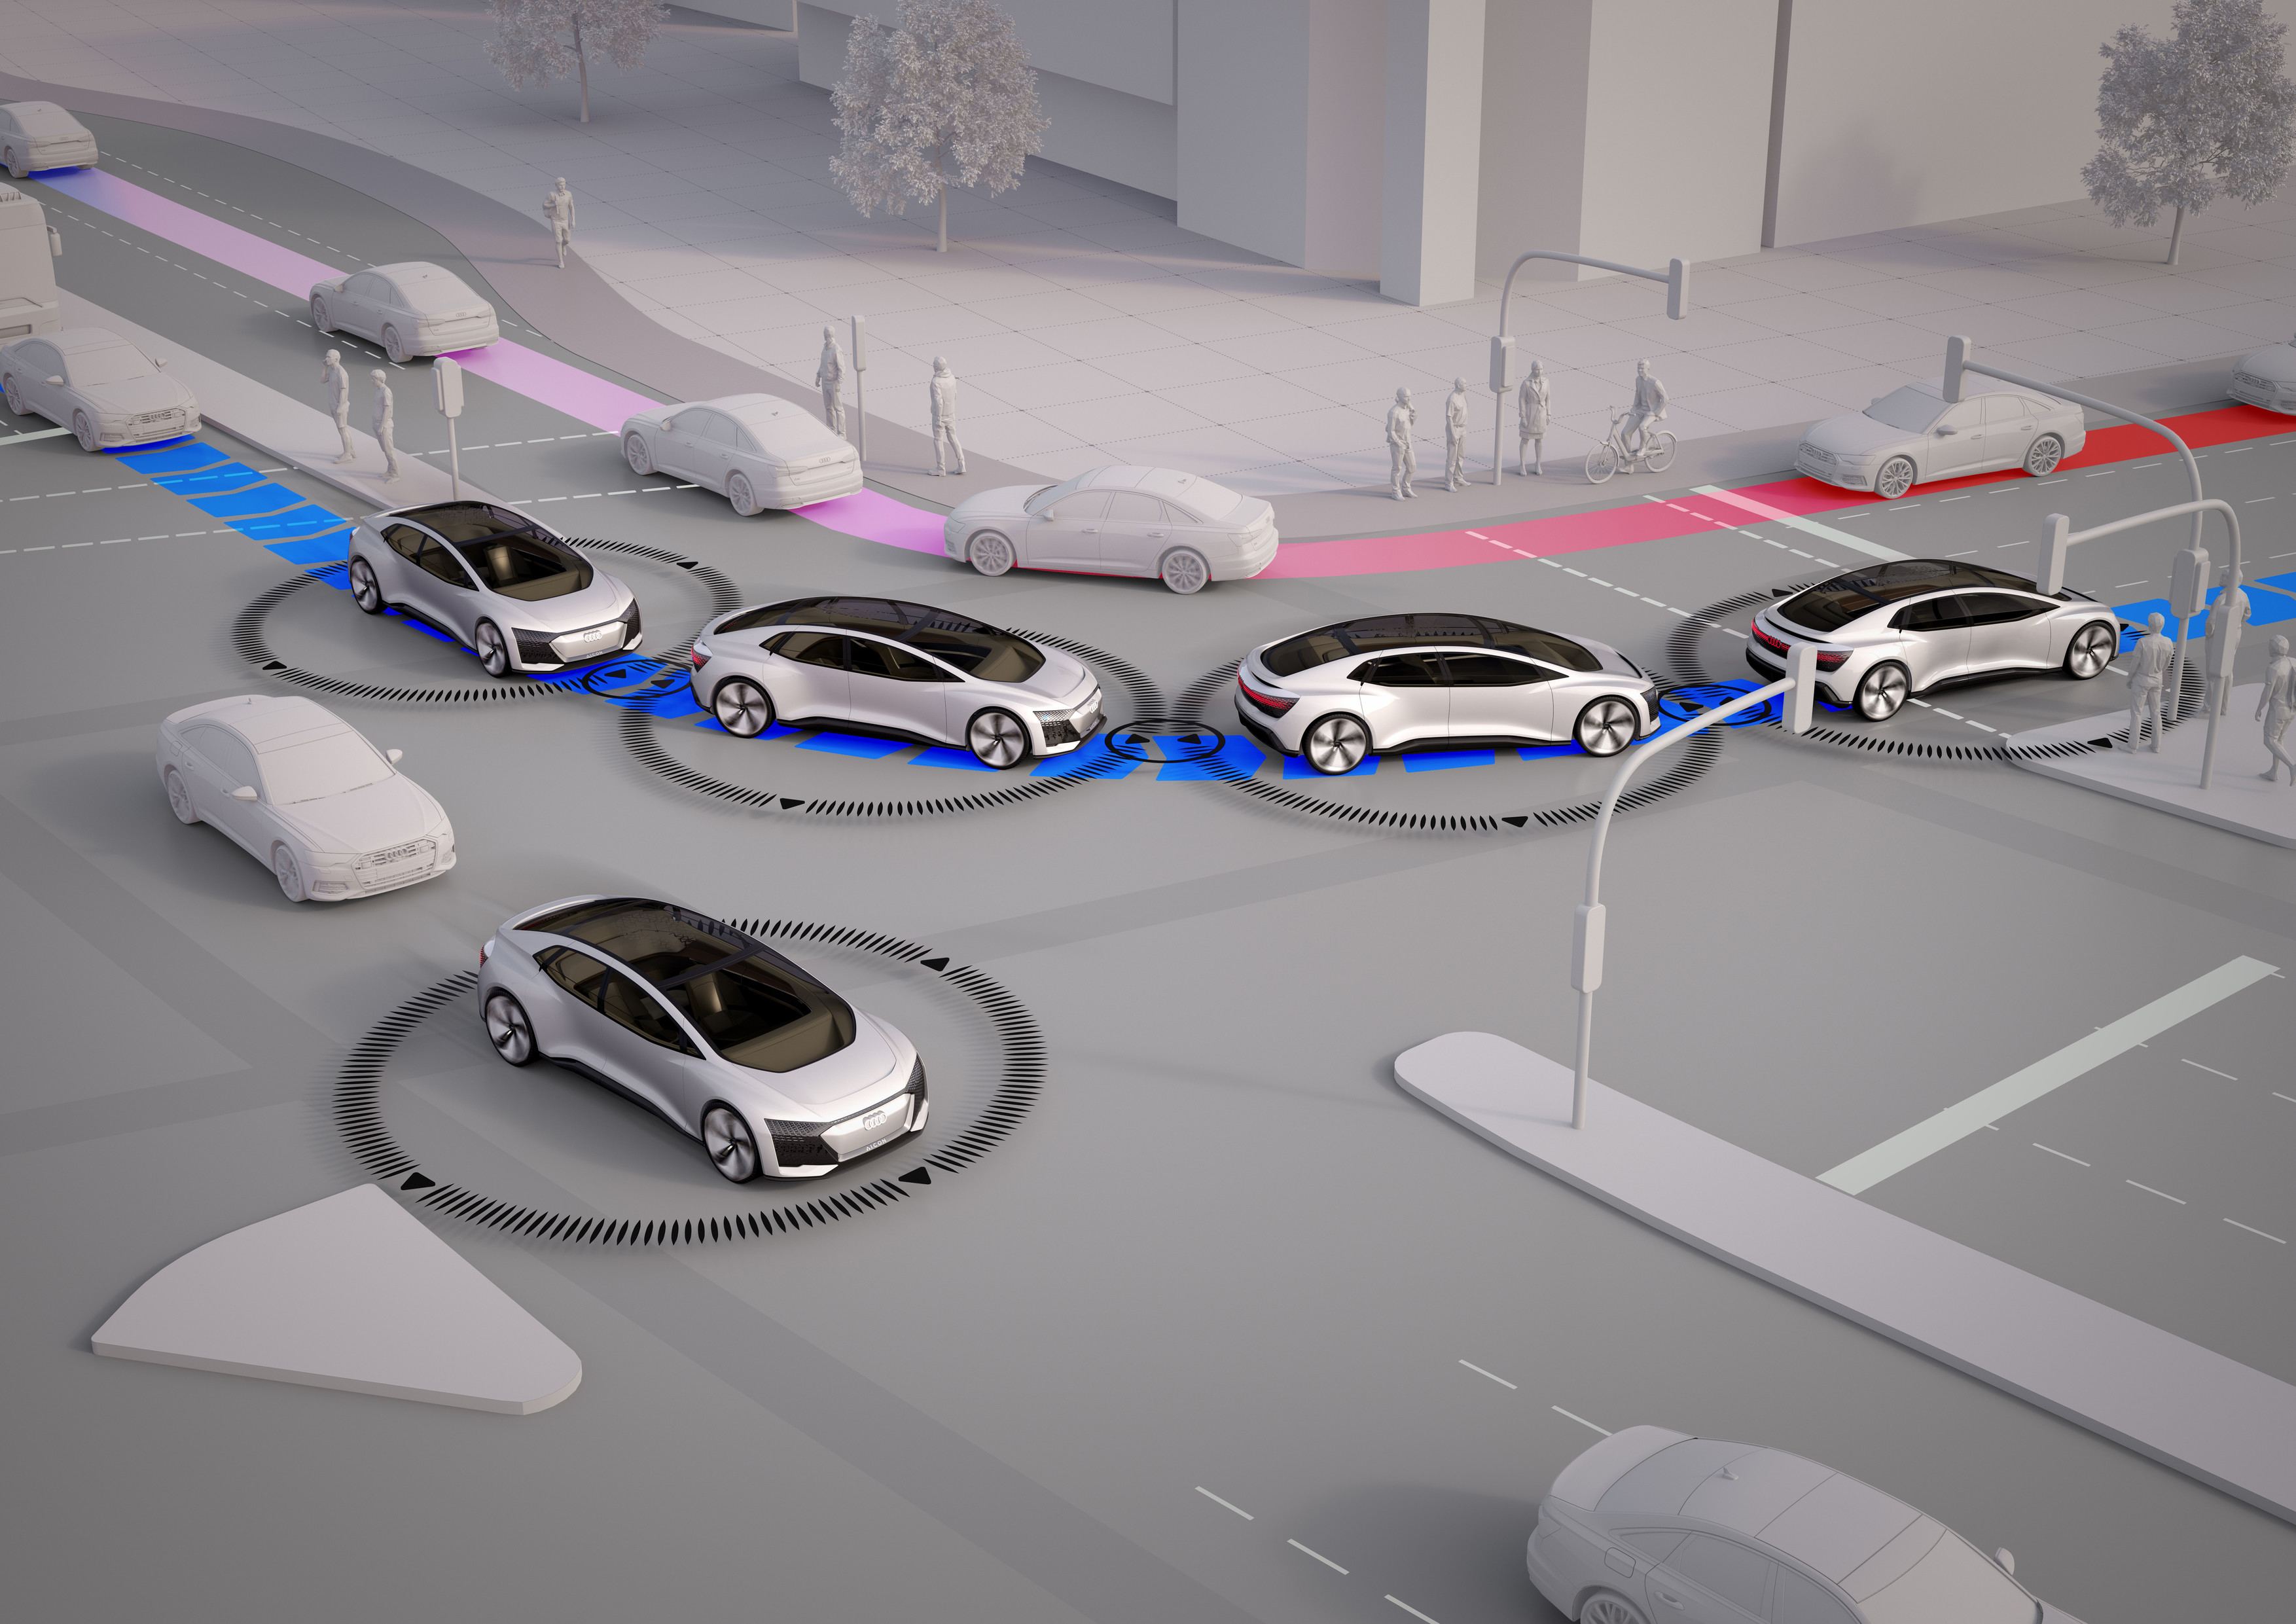 Audi Study Finds There will be No Congestion in the City of the Future